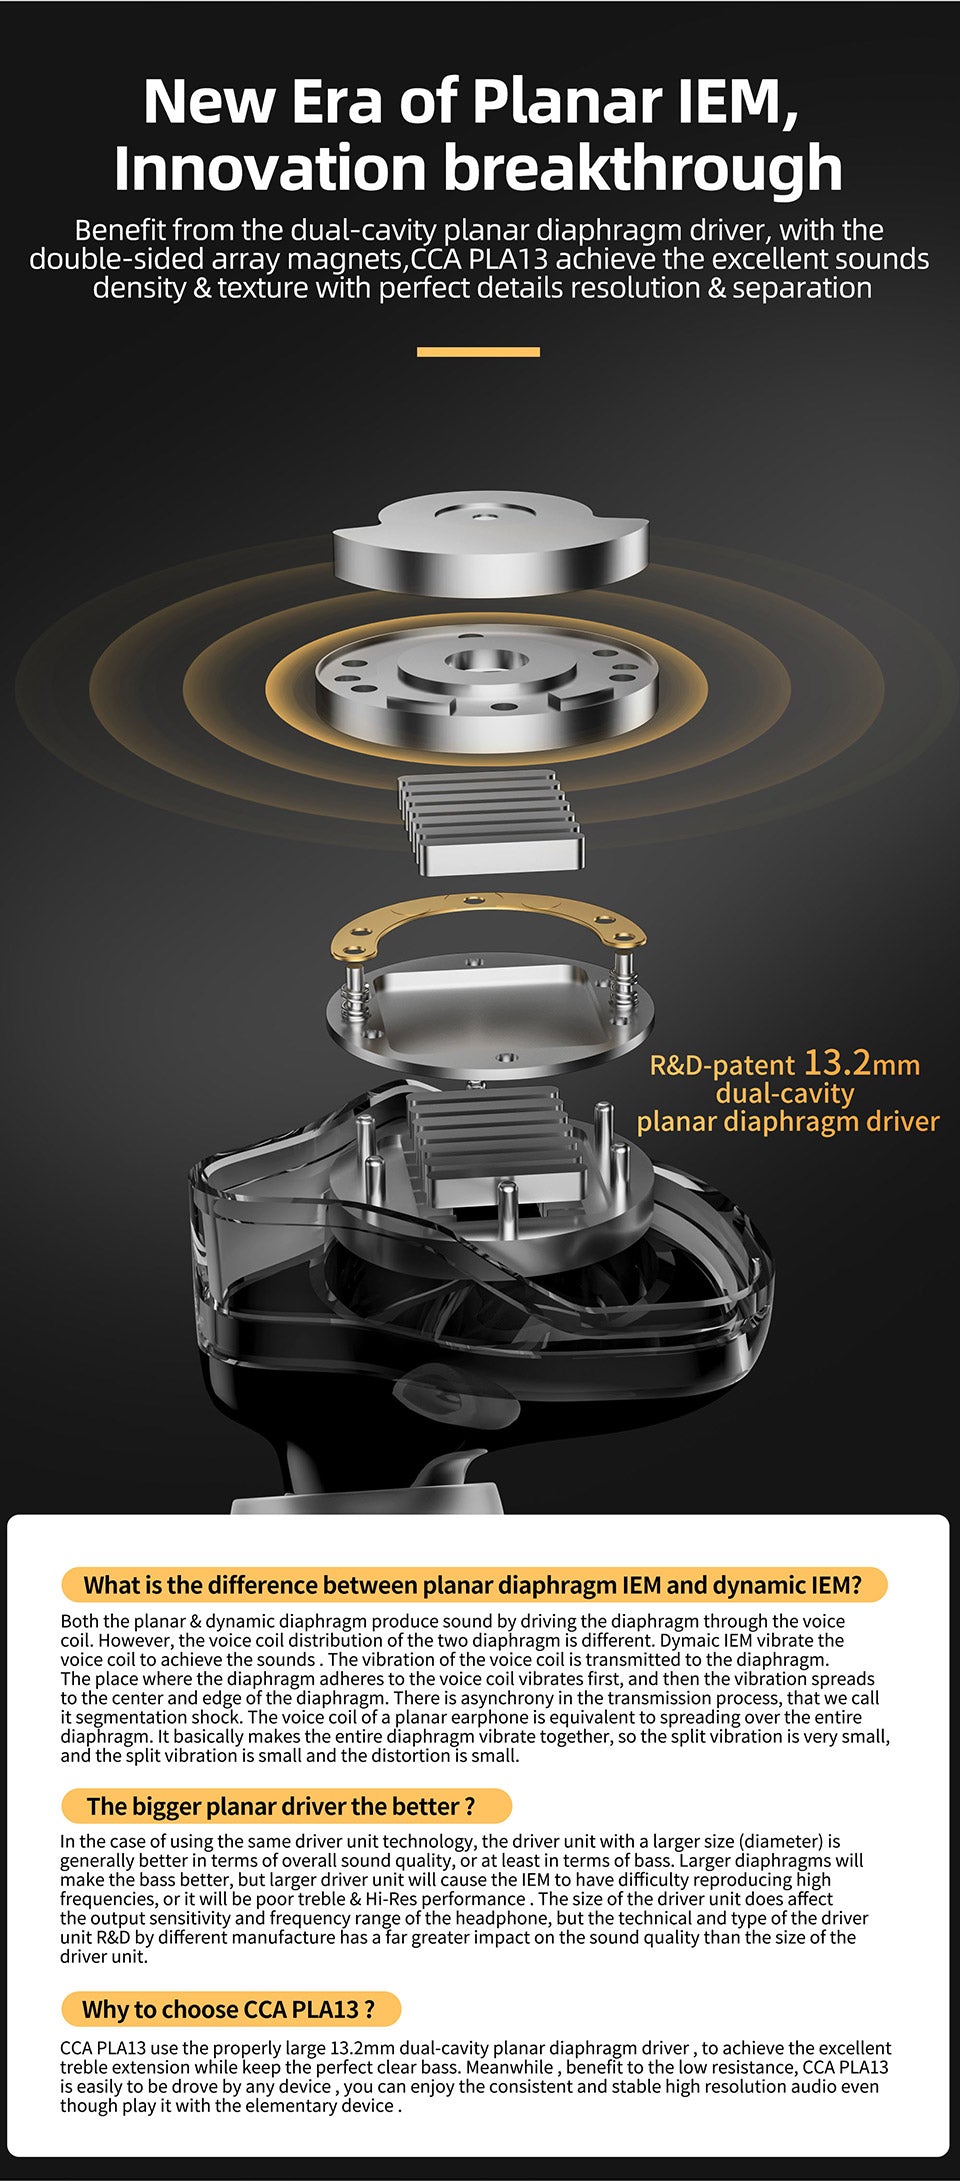 Both the planar & dynamic diaphragm produce sound by driving the diaphragm through the voice coil. However, the voice coil distribution of the two diaphragm is different. Dymaic IEM vibrate the voice coil to achieve the sounds . The vibration of the voice coil is transmitted to the diaphragm. The place where the diaphragm adheres to the voice coil vibrates first, and then the vibration spreads to the center and edge of the diaphragm. There is asynchrony in the transmission process, that we call it segmentation shock. The voice coil of a planar earphone is equivalent to spreading over the entire diaphragm. It basically makes the entire diaphragm vibrate together, so the split vibration is very small, and the split vibration is small and the distortion is small.